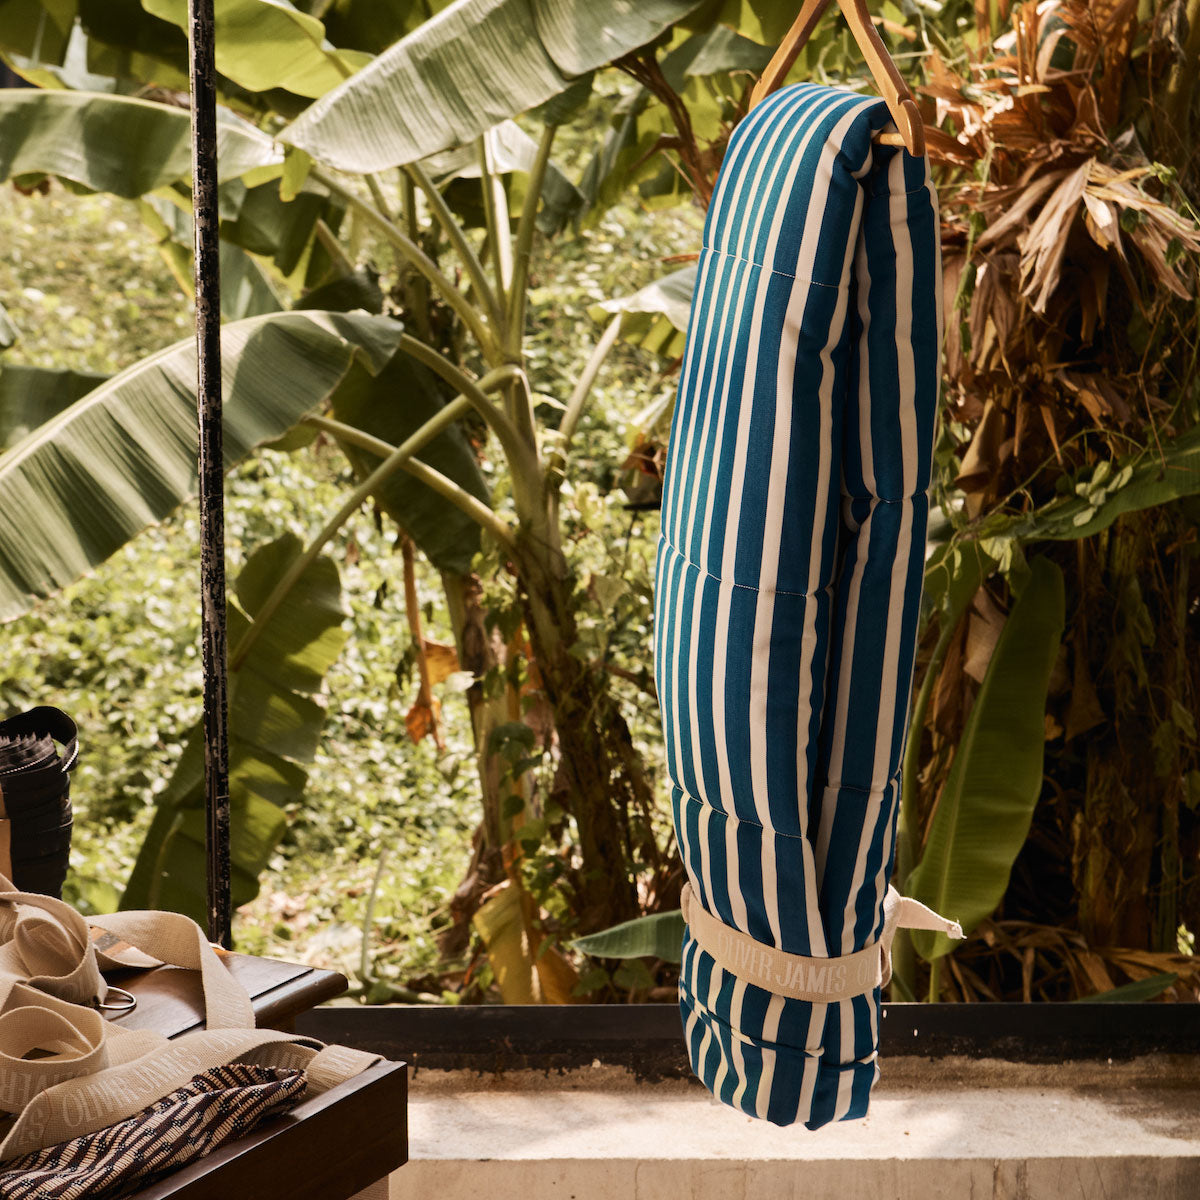 A luxury pool float cover hanging on a cloths rack with tropical plants in the background and luxury lilo components in the foreground.